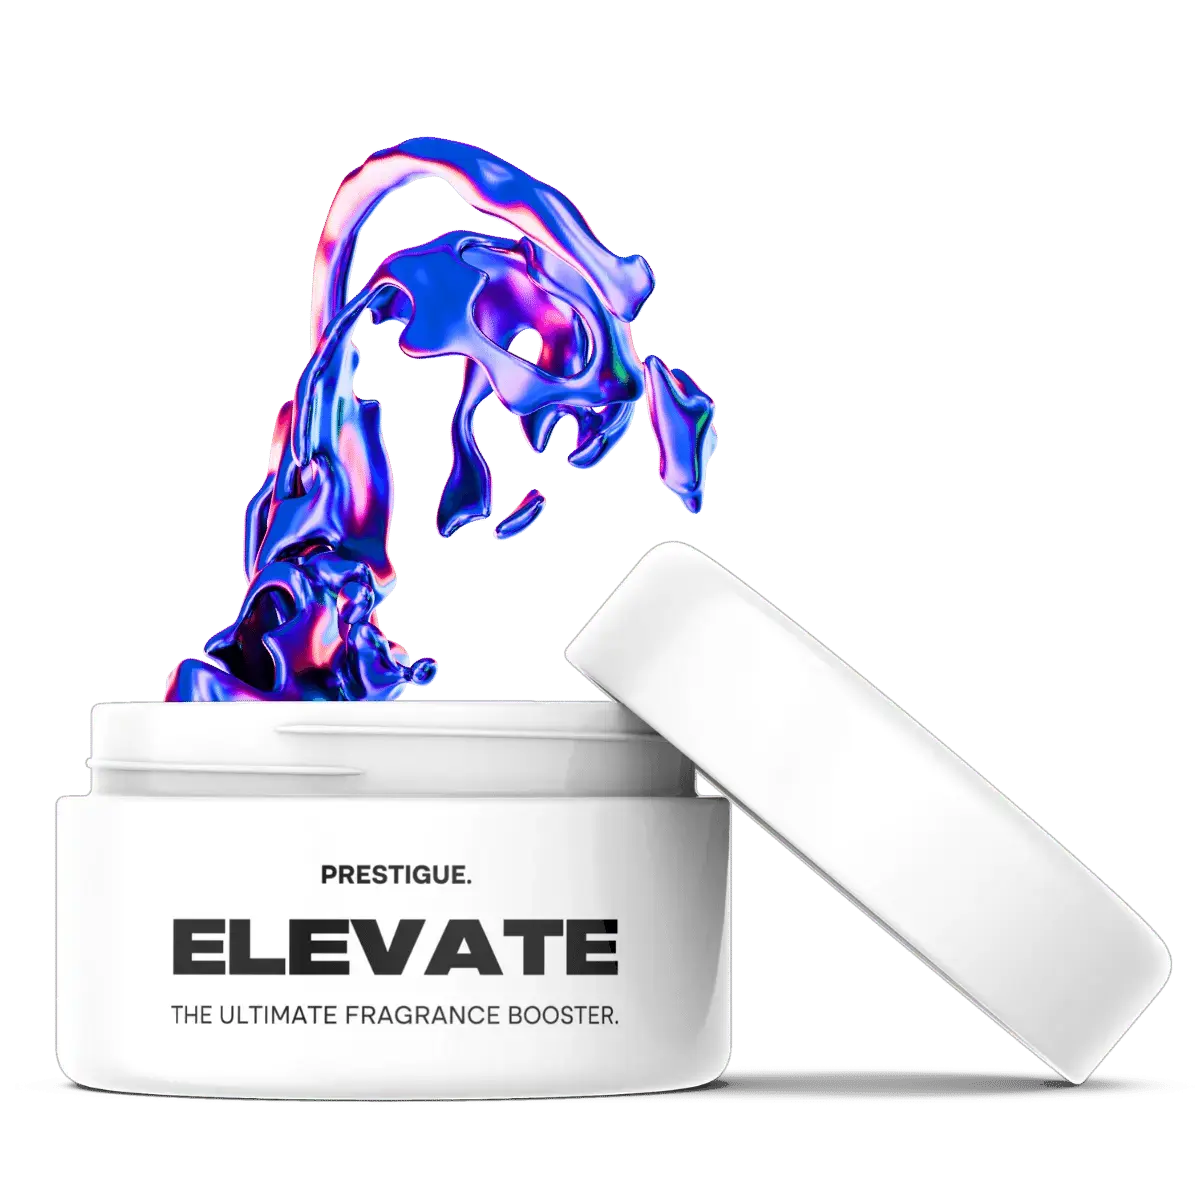 ELEVATE - PRESTIGUE THE ULTIMATE FRAGRANCE BOOSTER.